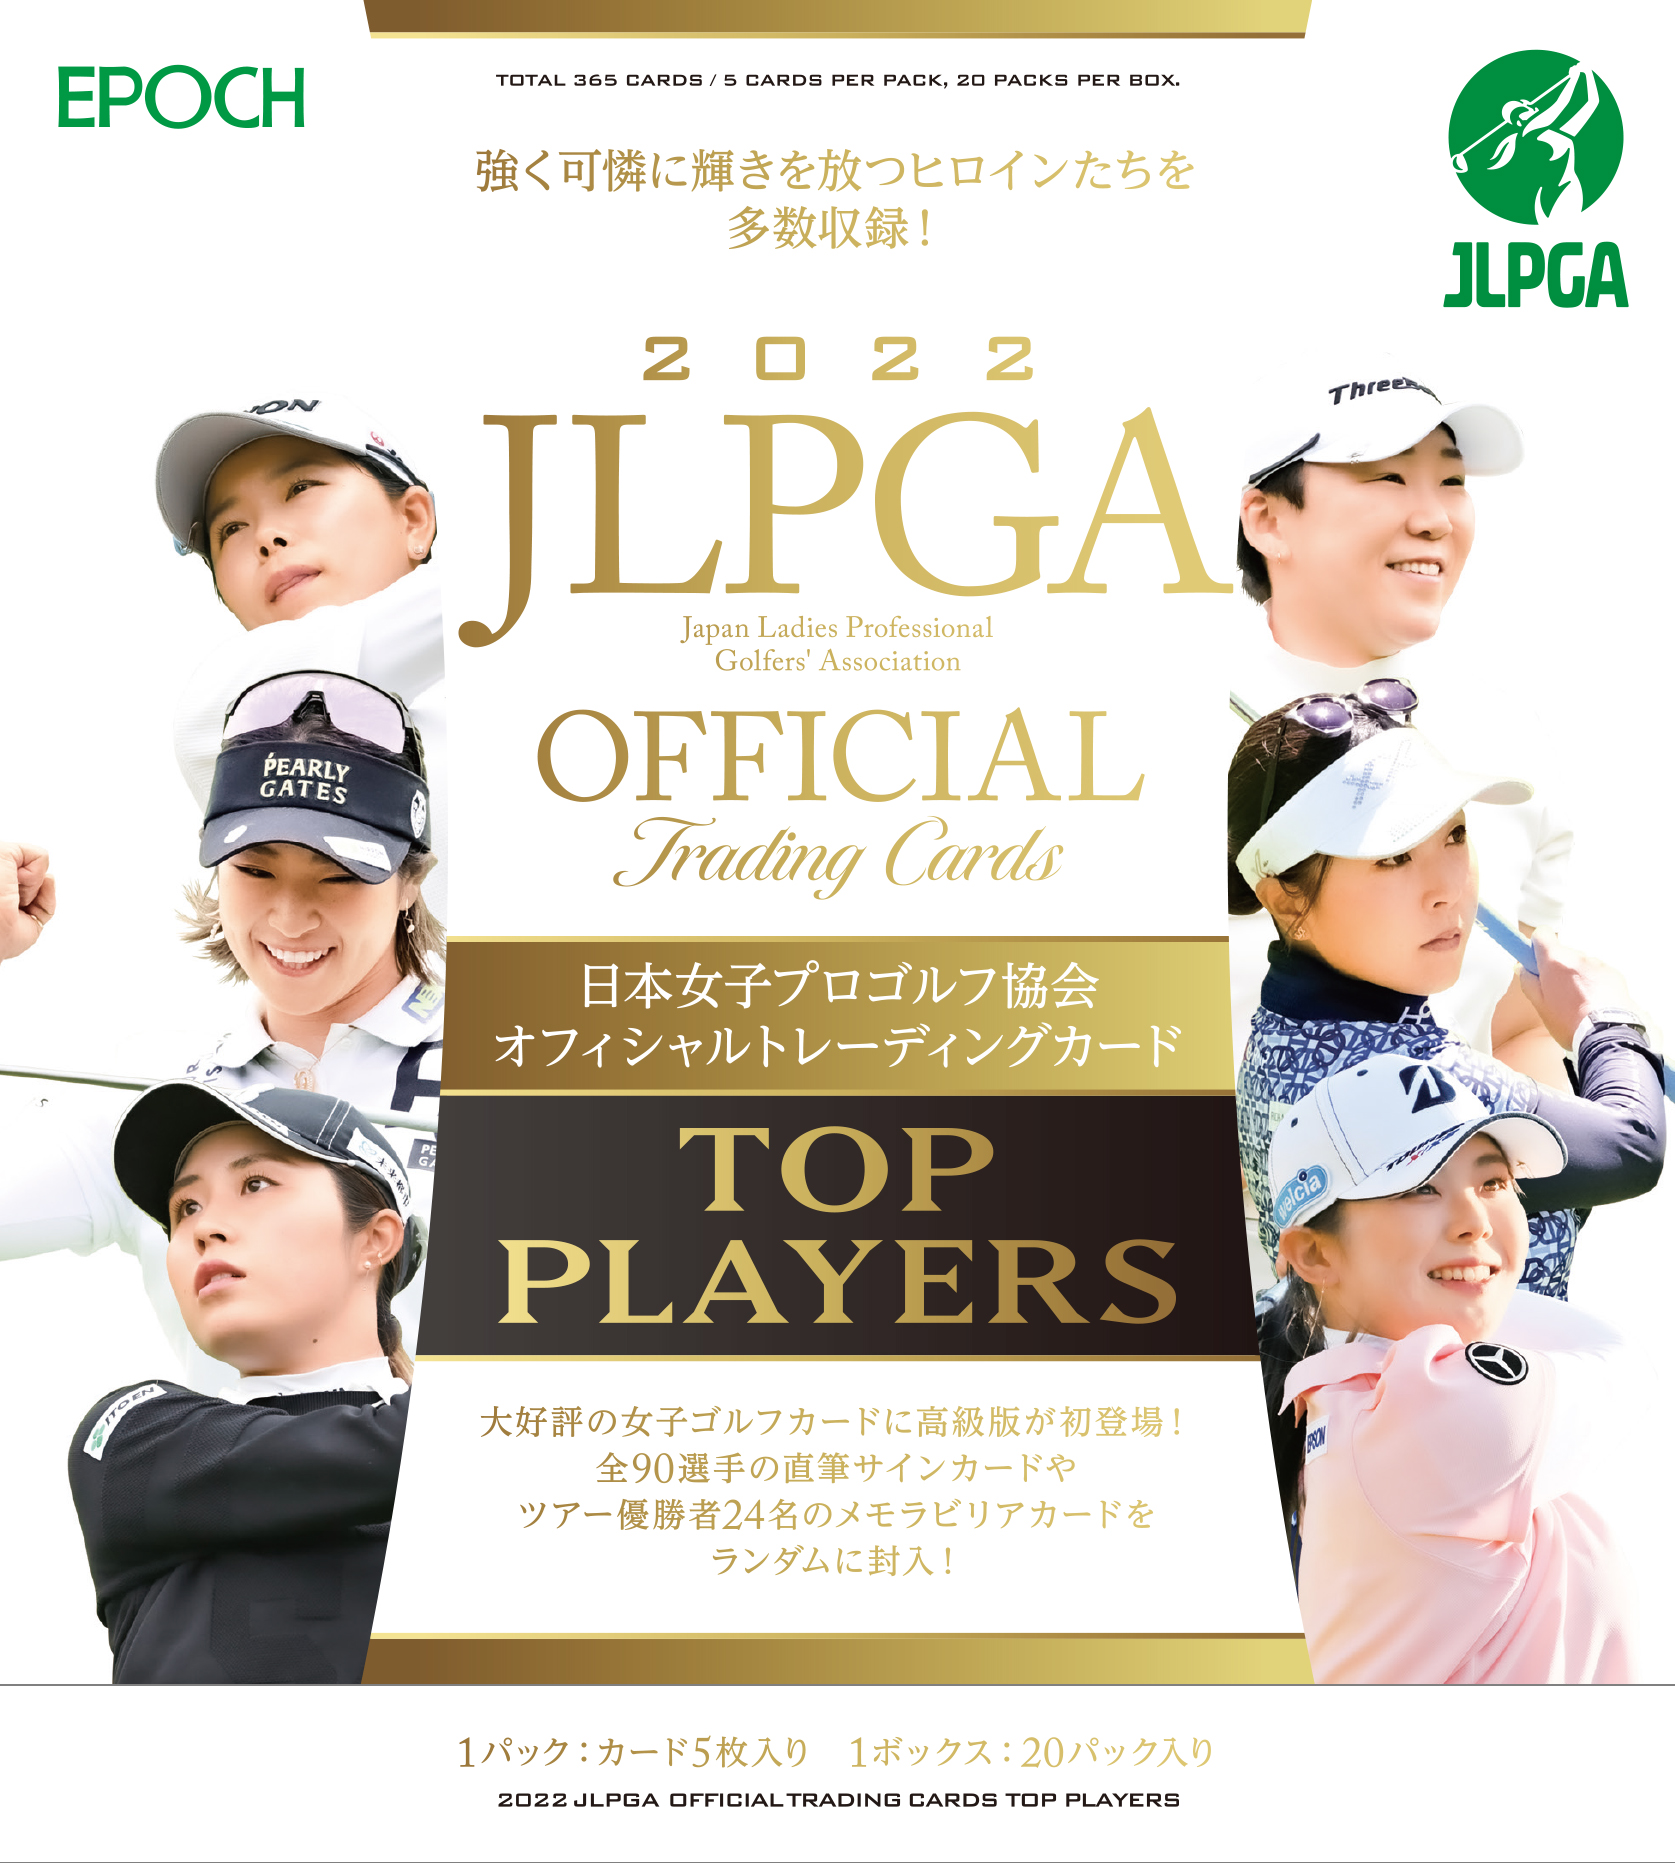 ⛳ EPOCH 2022 JLPGA OFFICIAL TRADING CARDS TOP PLAYERS【製品情報 